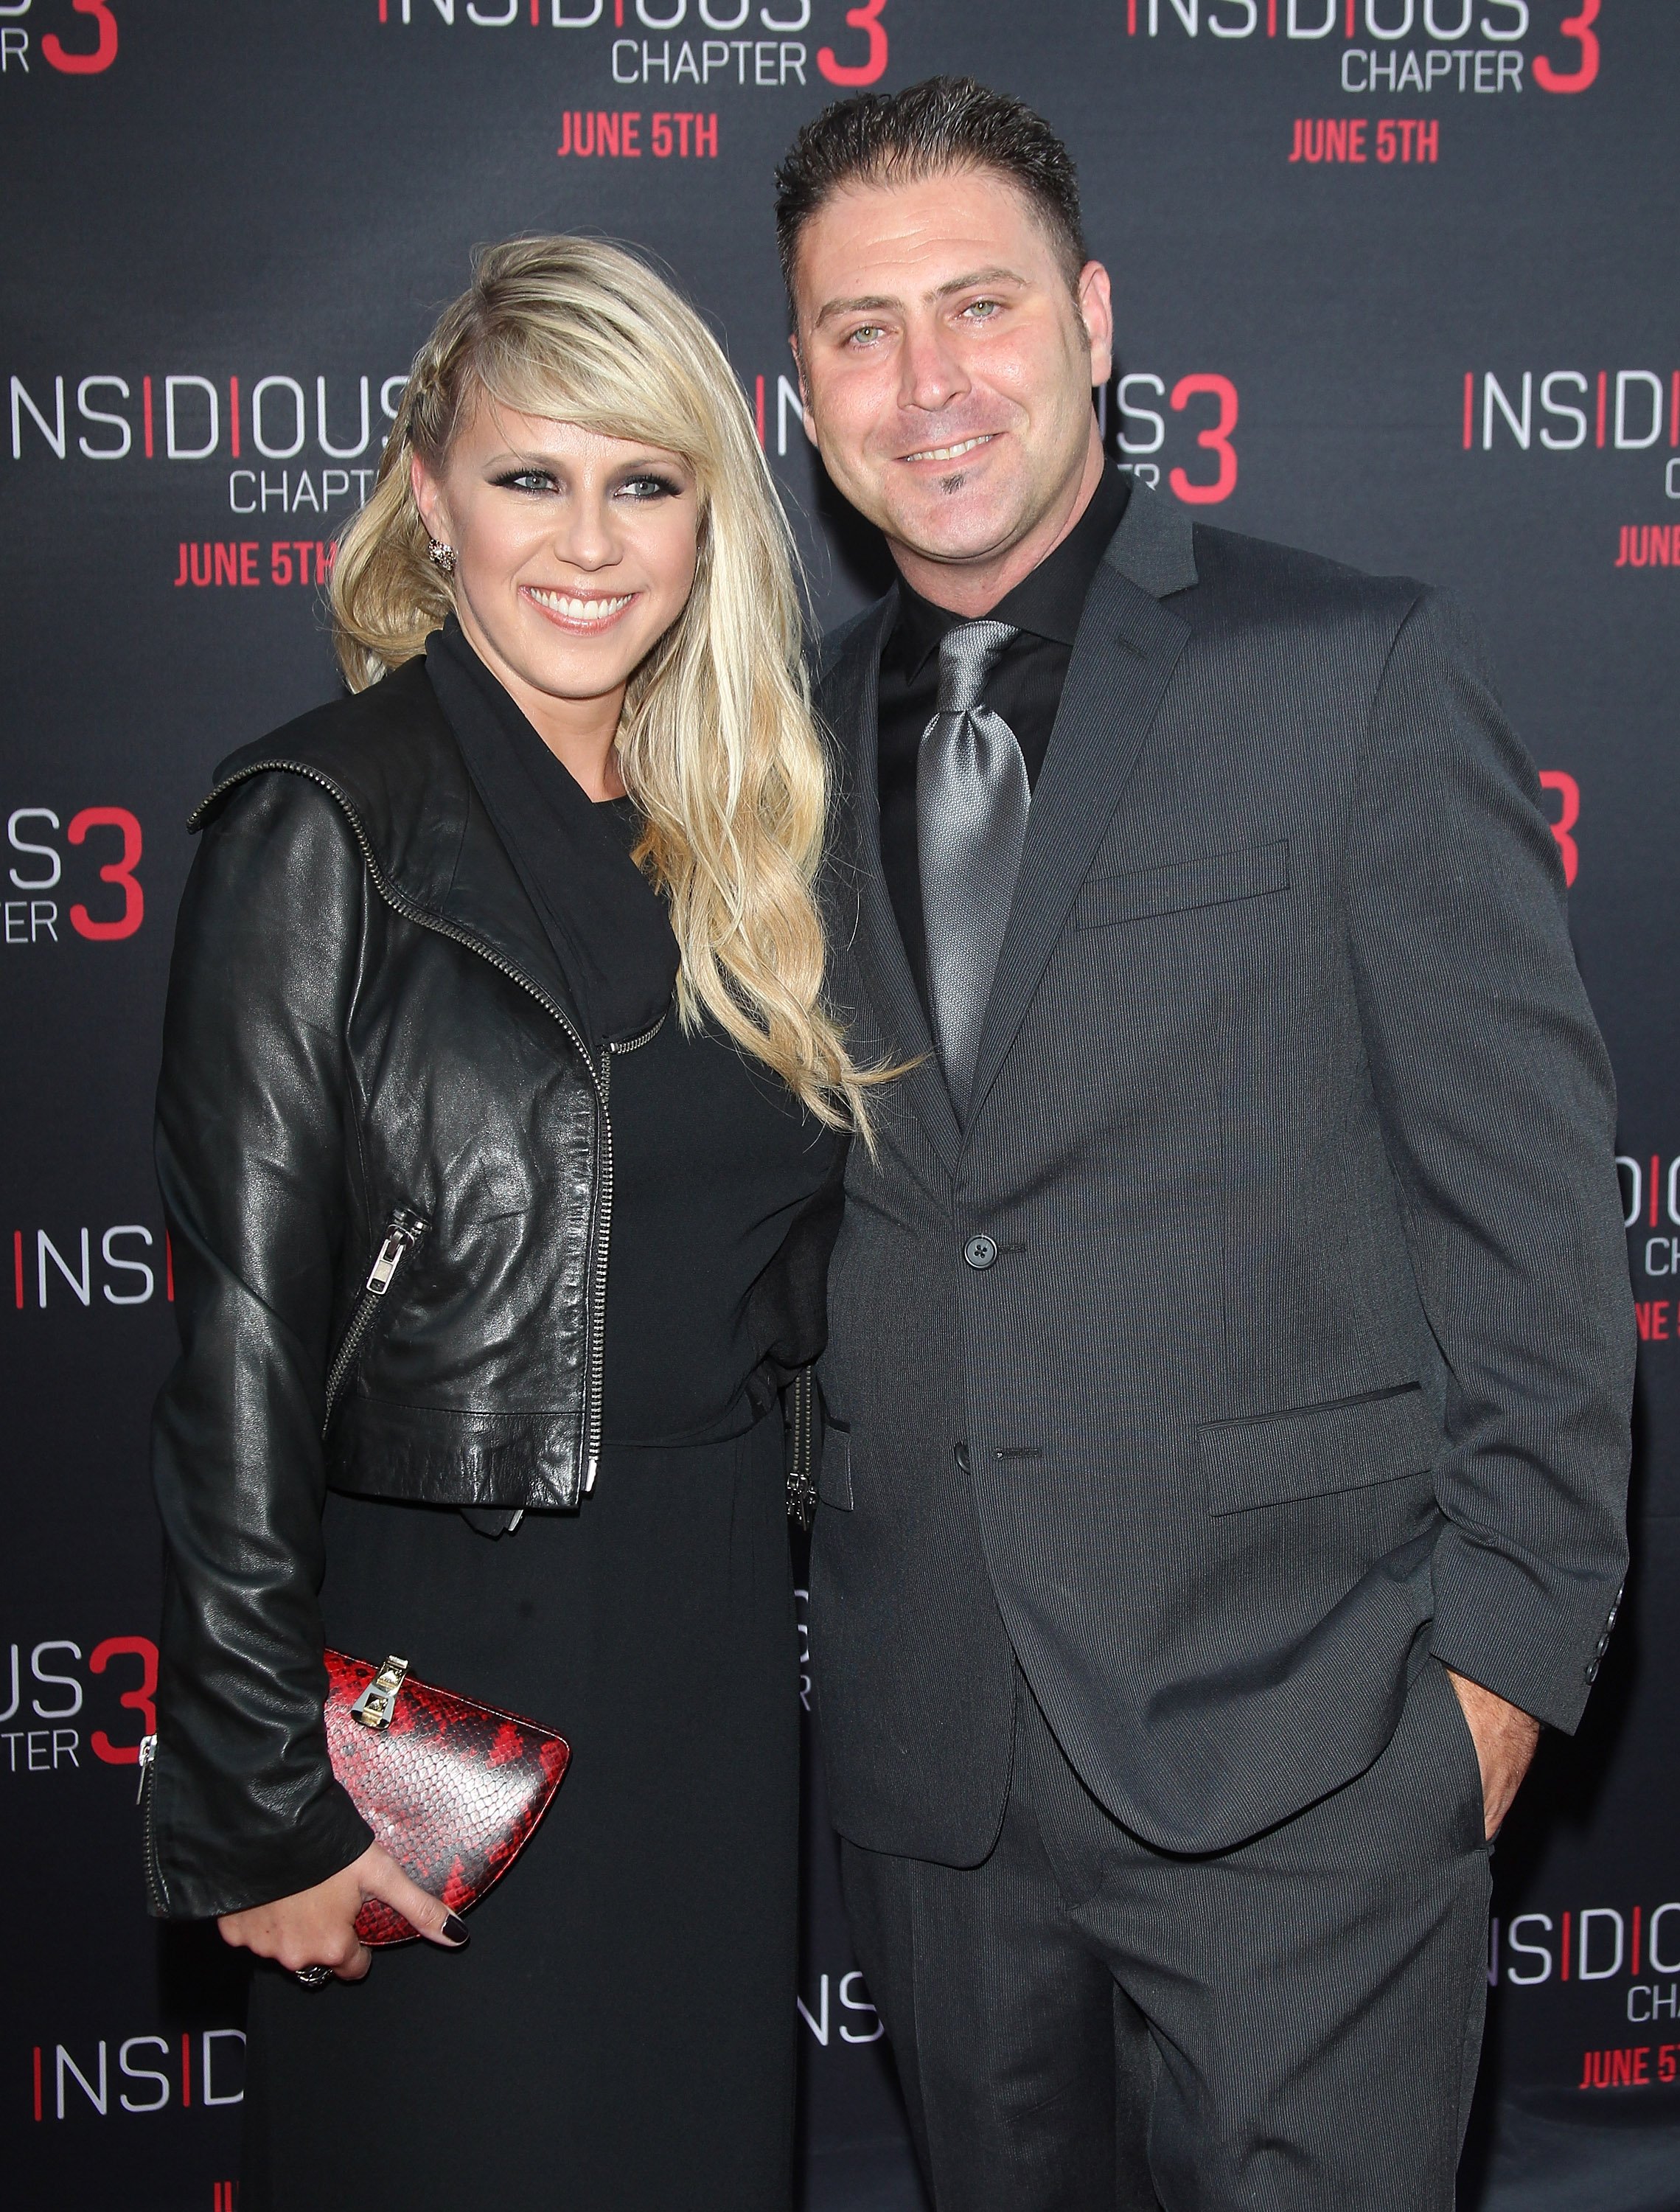 Jodie Sweetin and Justin Hodak arriving at the Los Angeles premiere of "Insidious: Chapter 3" at TCL Chinese Theatre IMAX on June 4, 2015 in Hollywood, California.┃Source: Getty Images